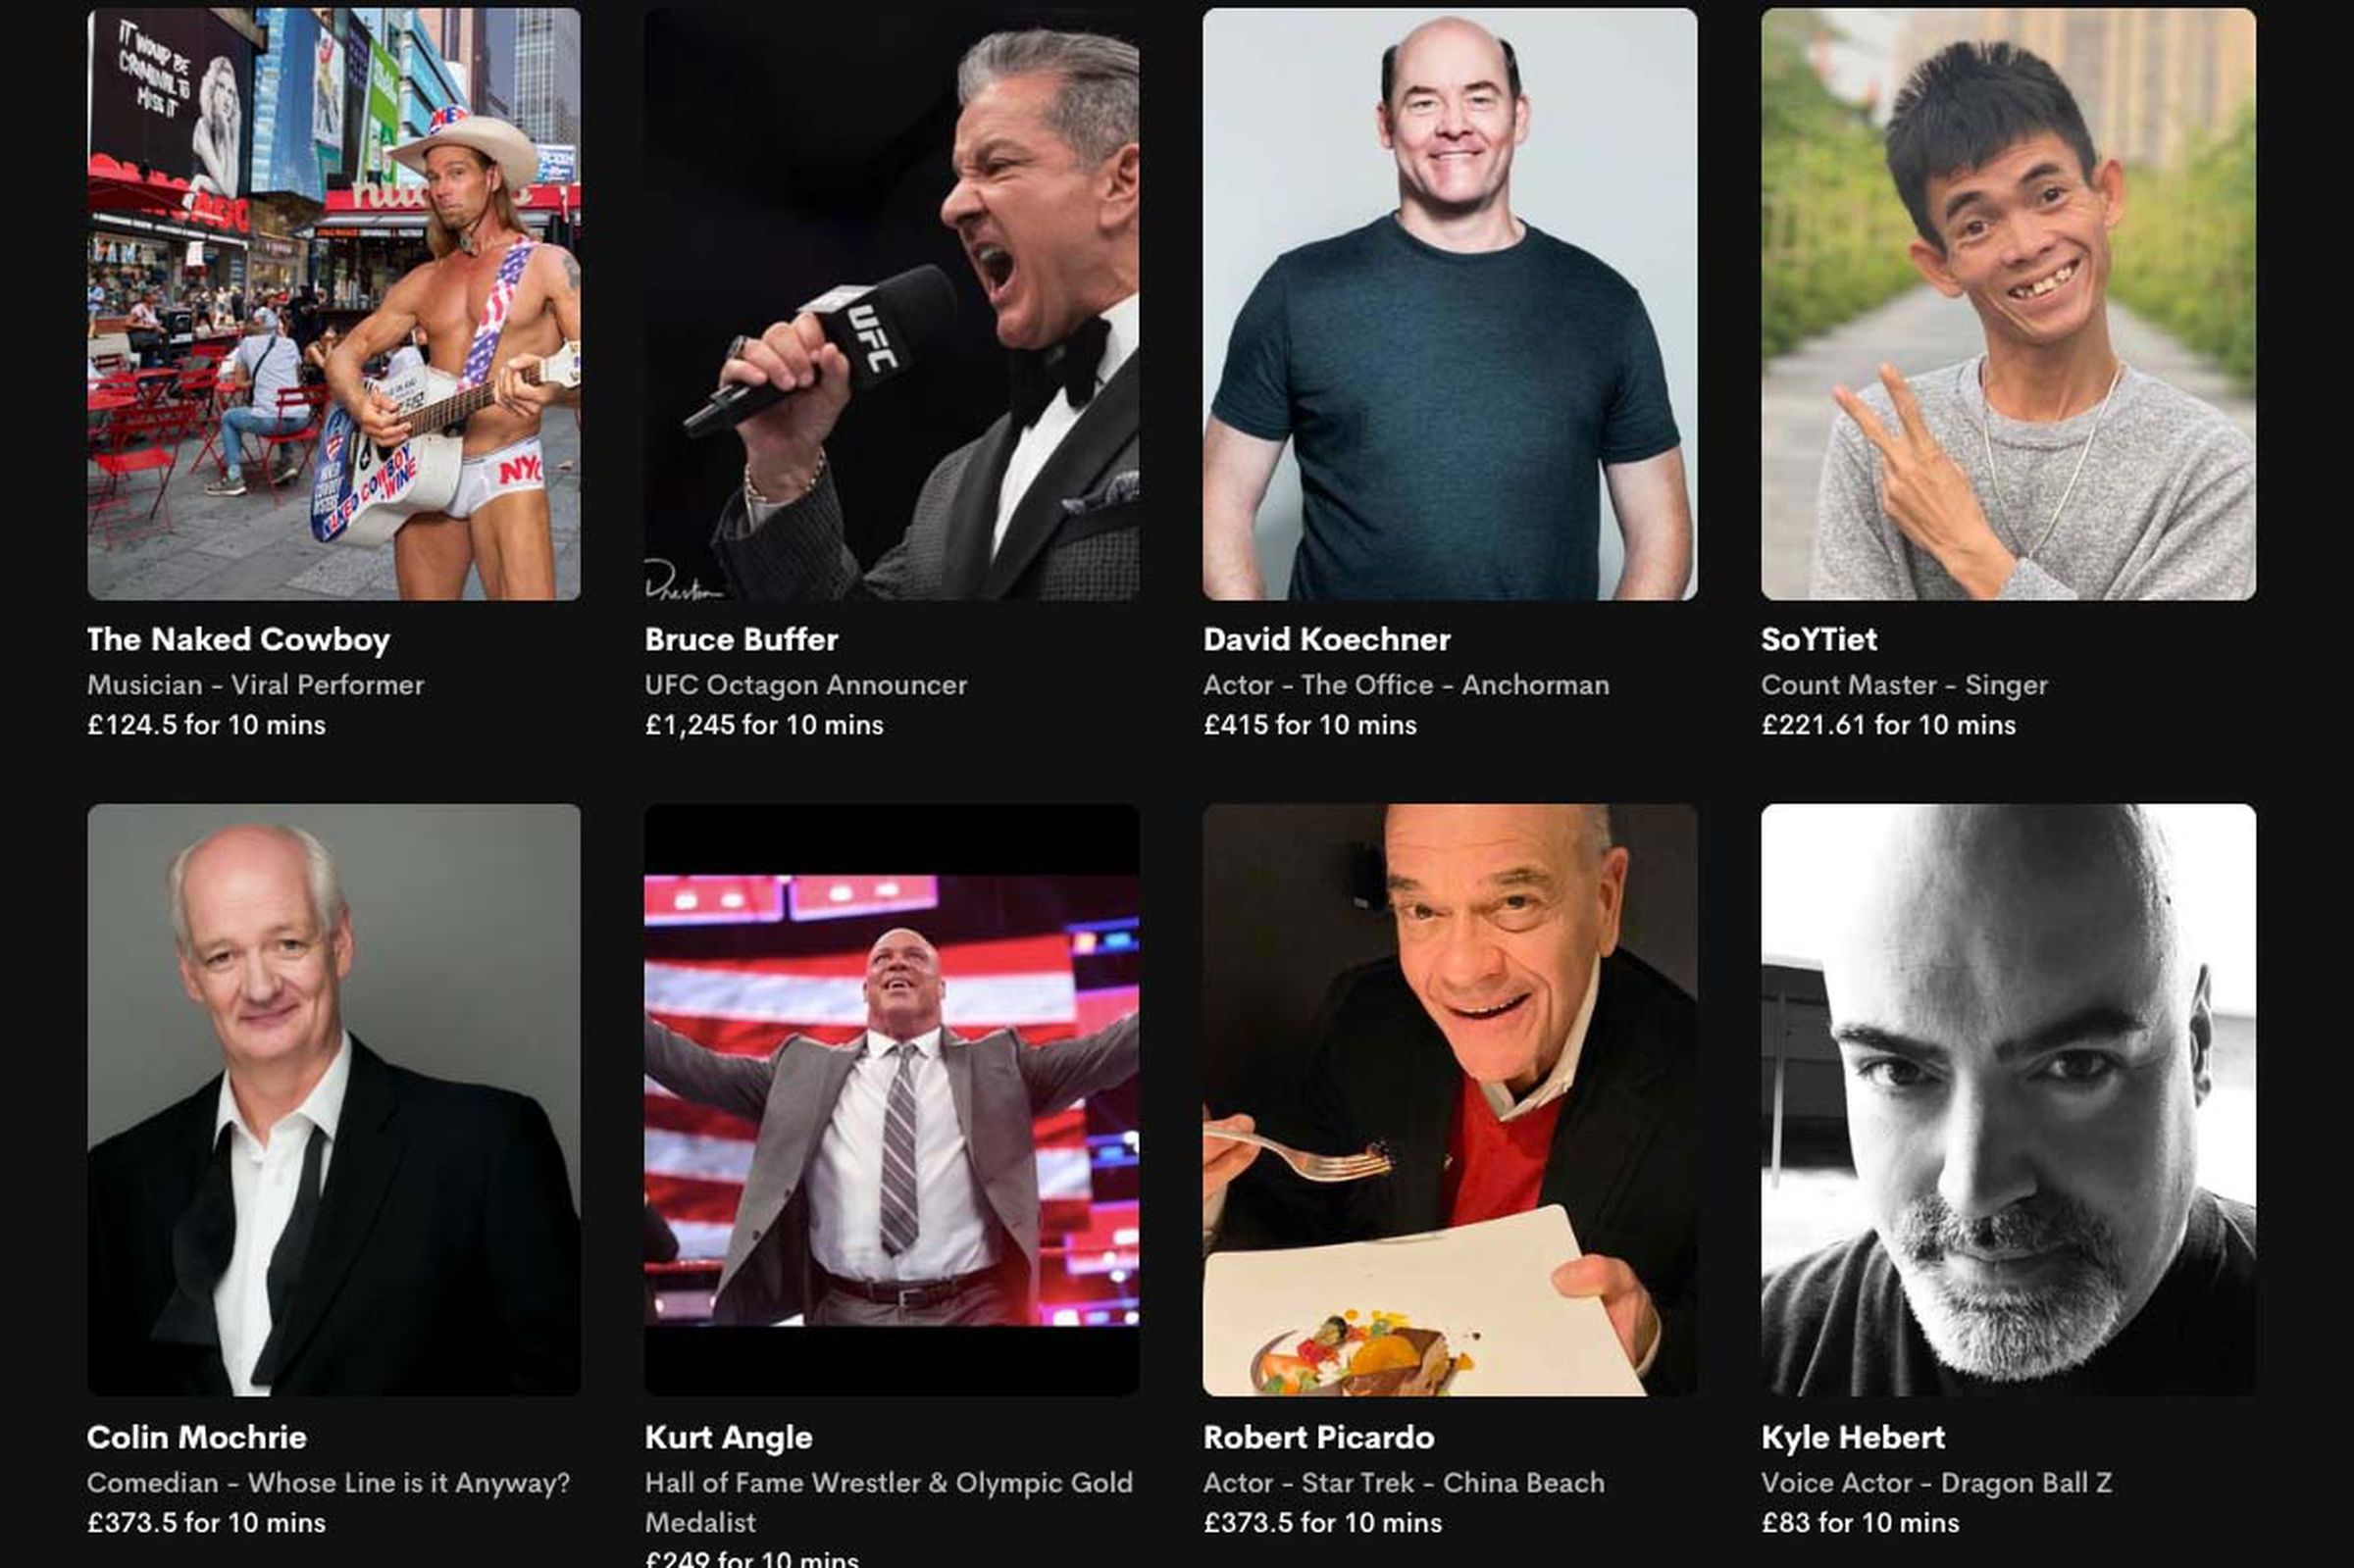 A selection of celebs with their Cameo Live pricing in GBP.